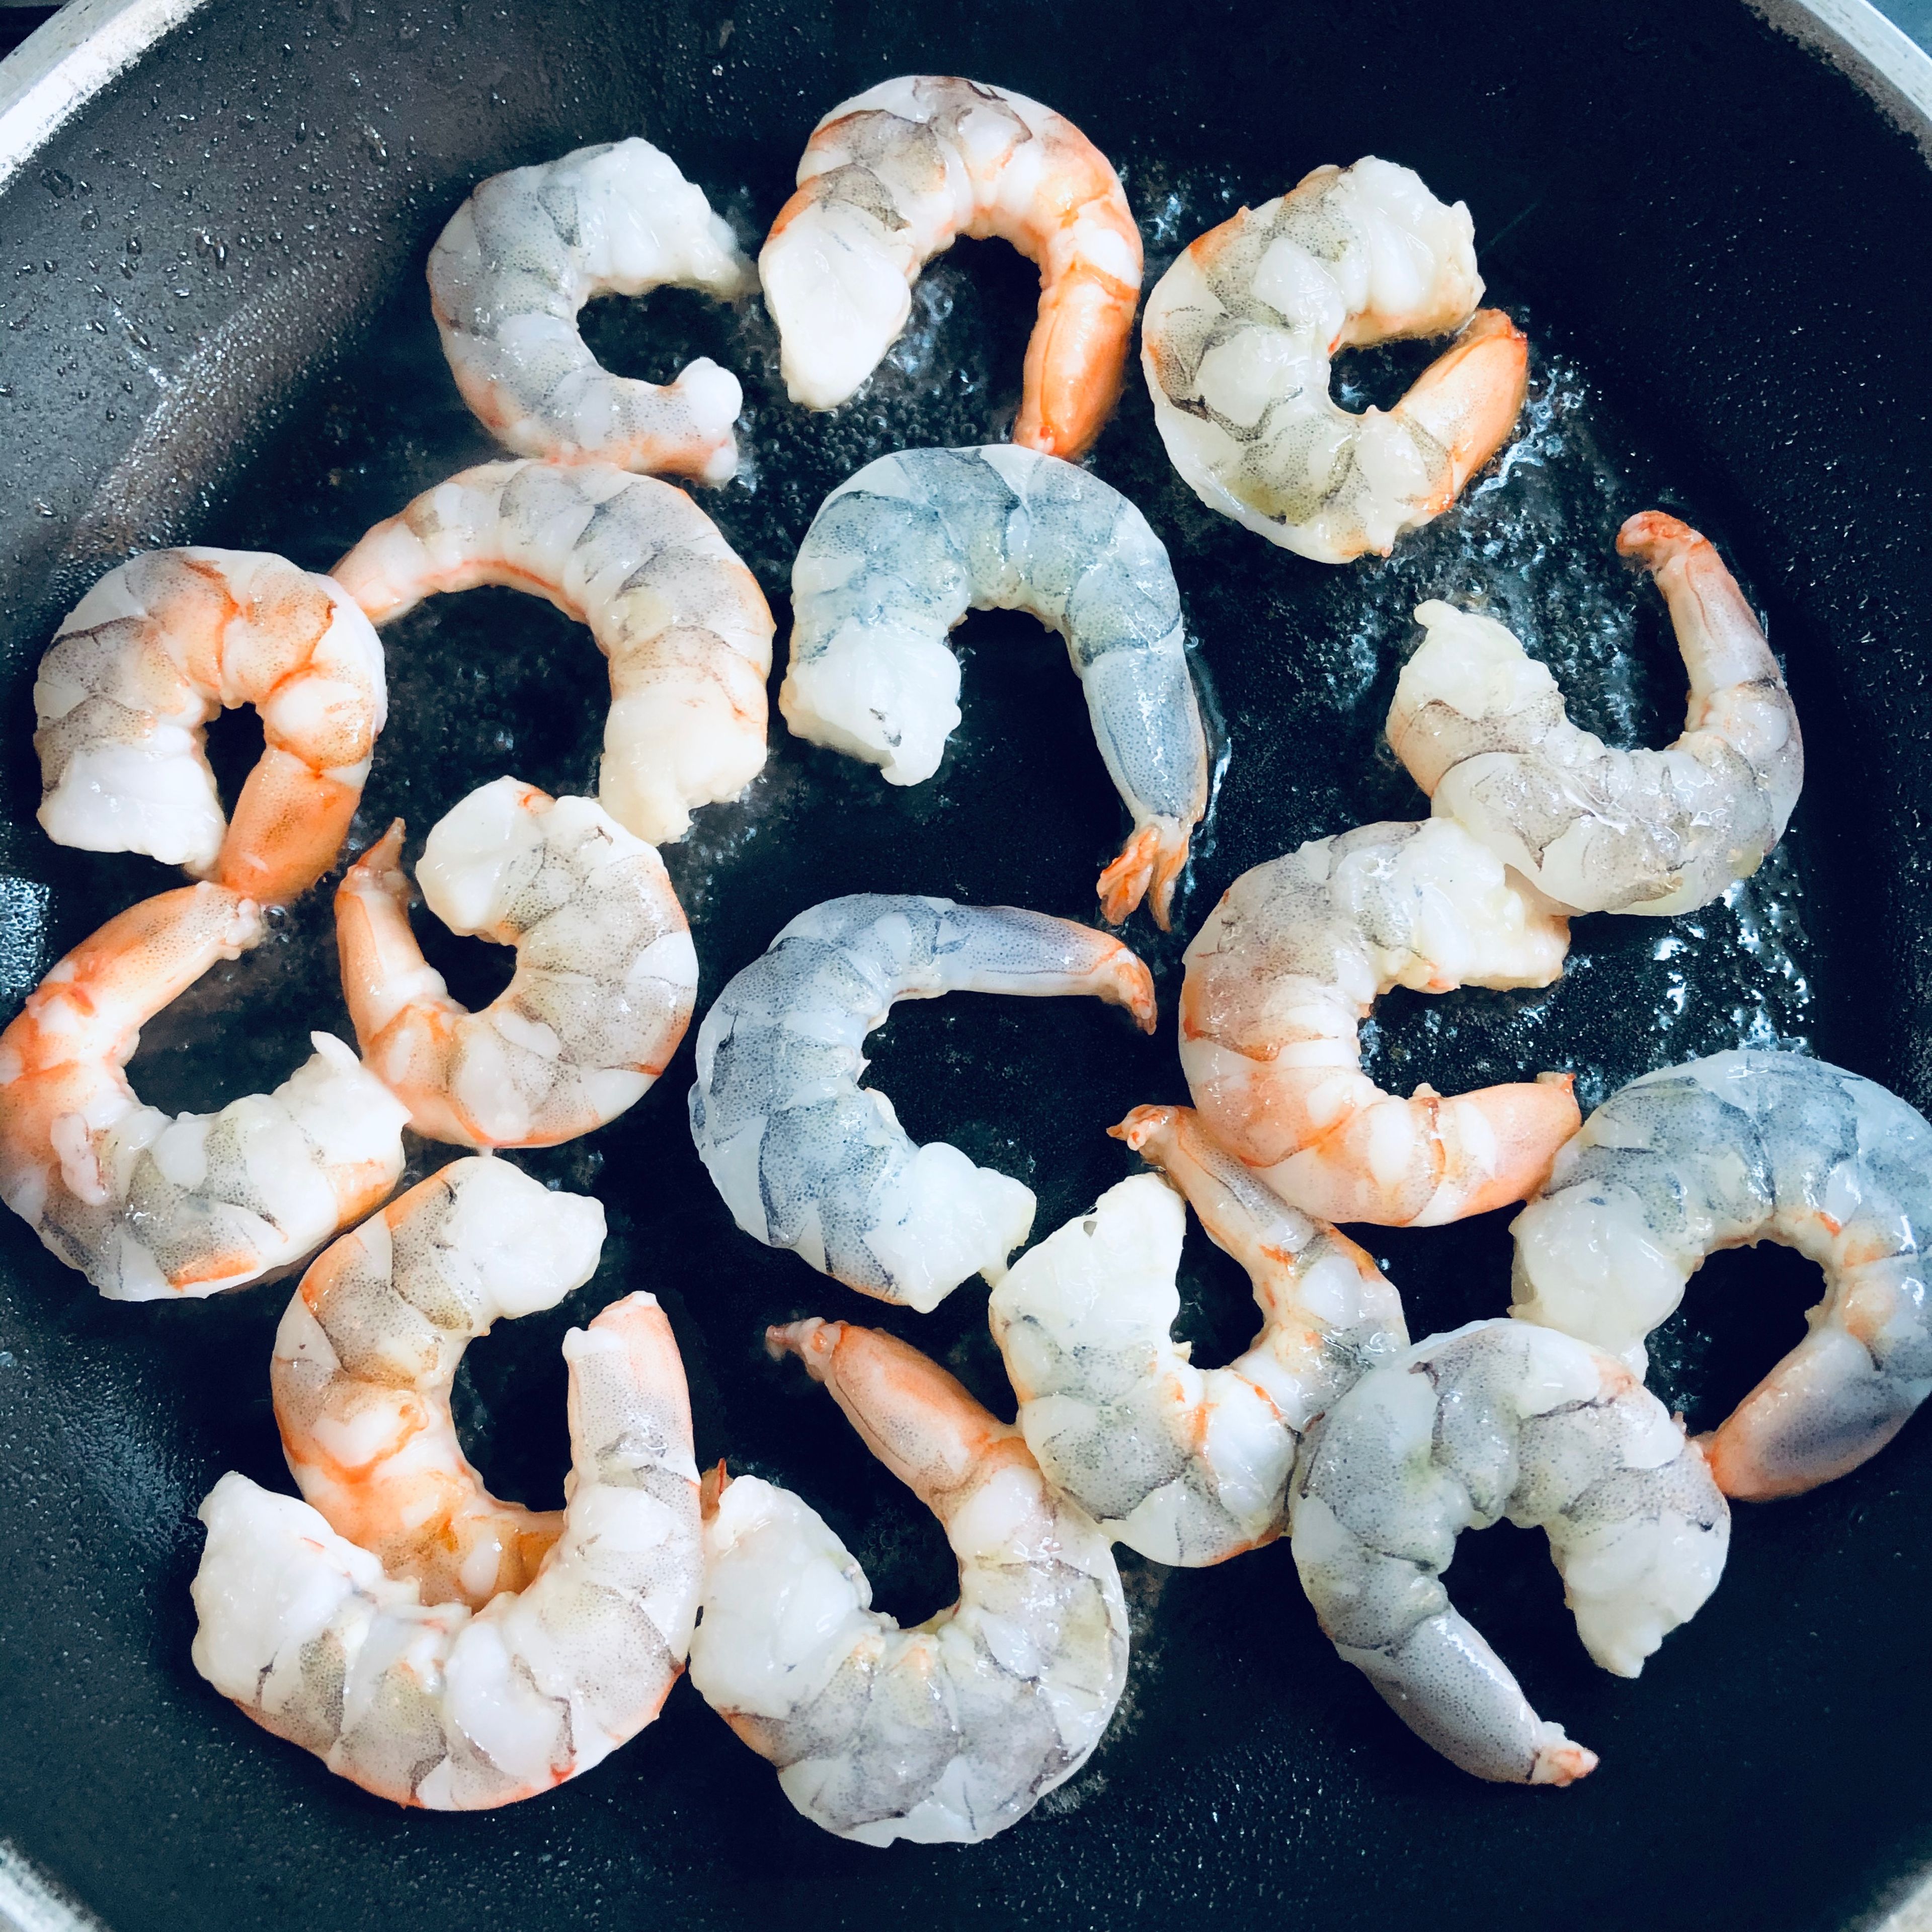 Place a frying pan on a medium heat, add the olive oil and when hot, add the prawns. Turn the heat up to high and fry the prawns a minute or two on each side until slightly browned and cooked through. Remove the prawns from the pan and set aside.